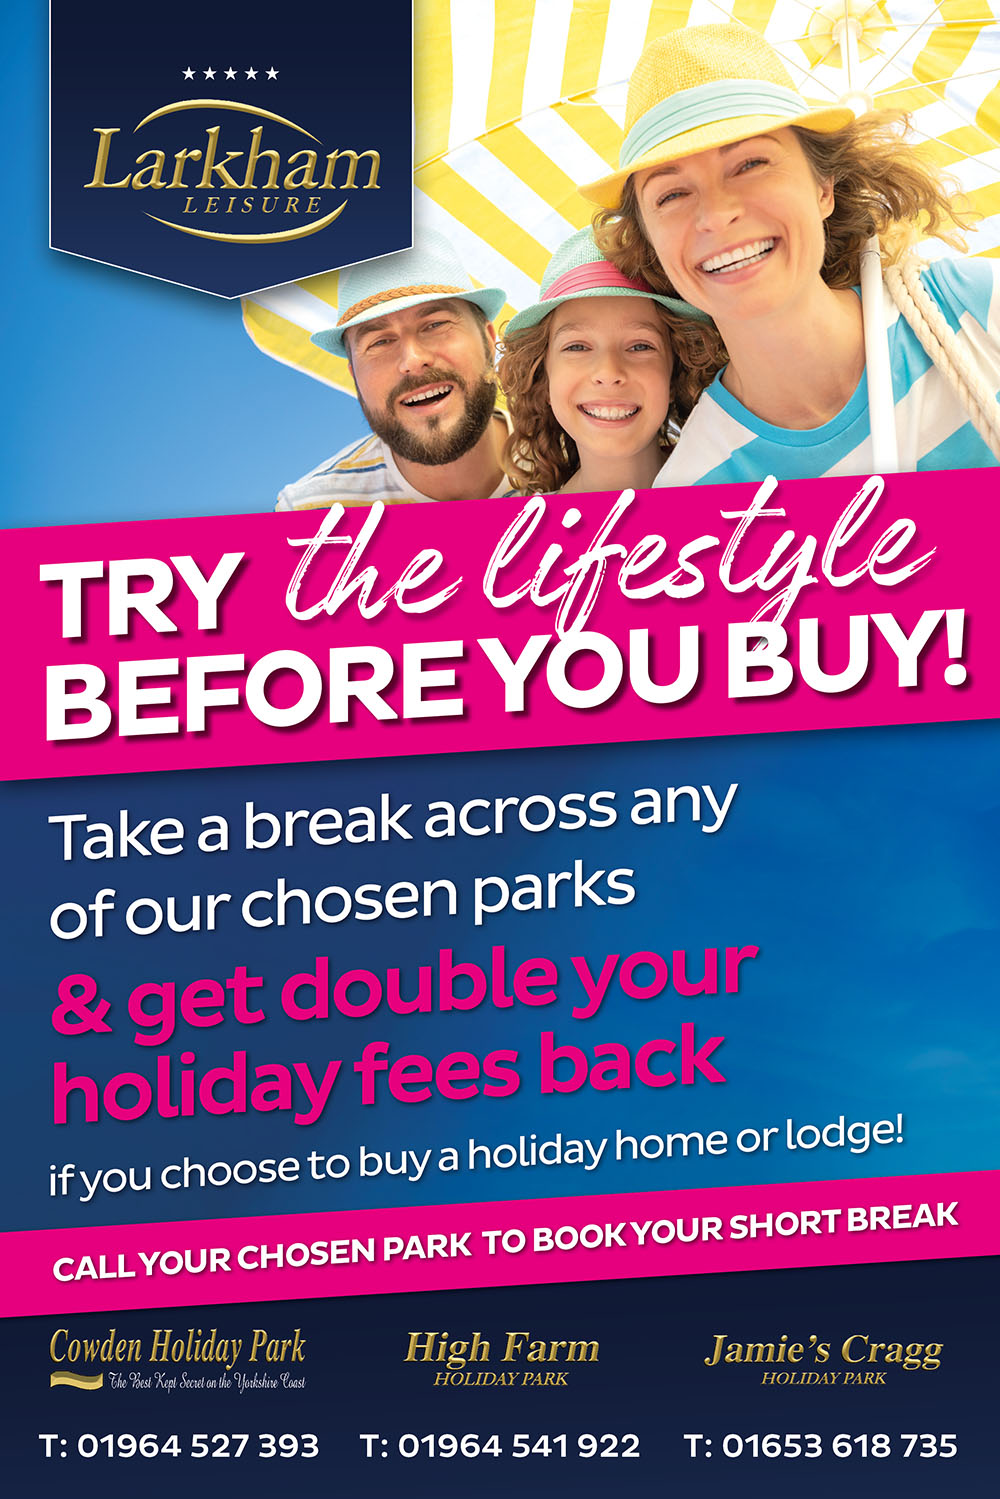 Try the lifestyle before you buy! Take a break across any of our chosen parks and get double your fees back.